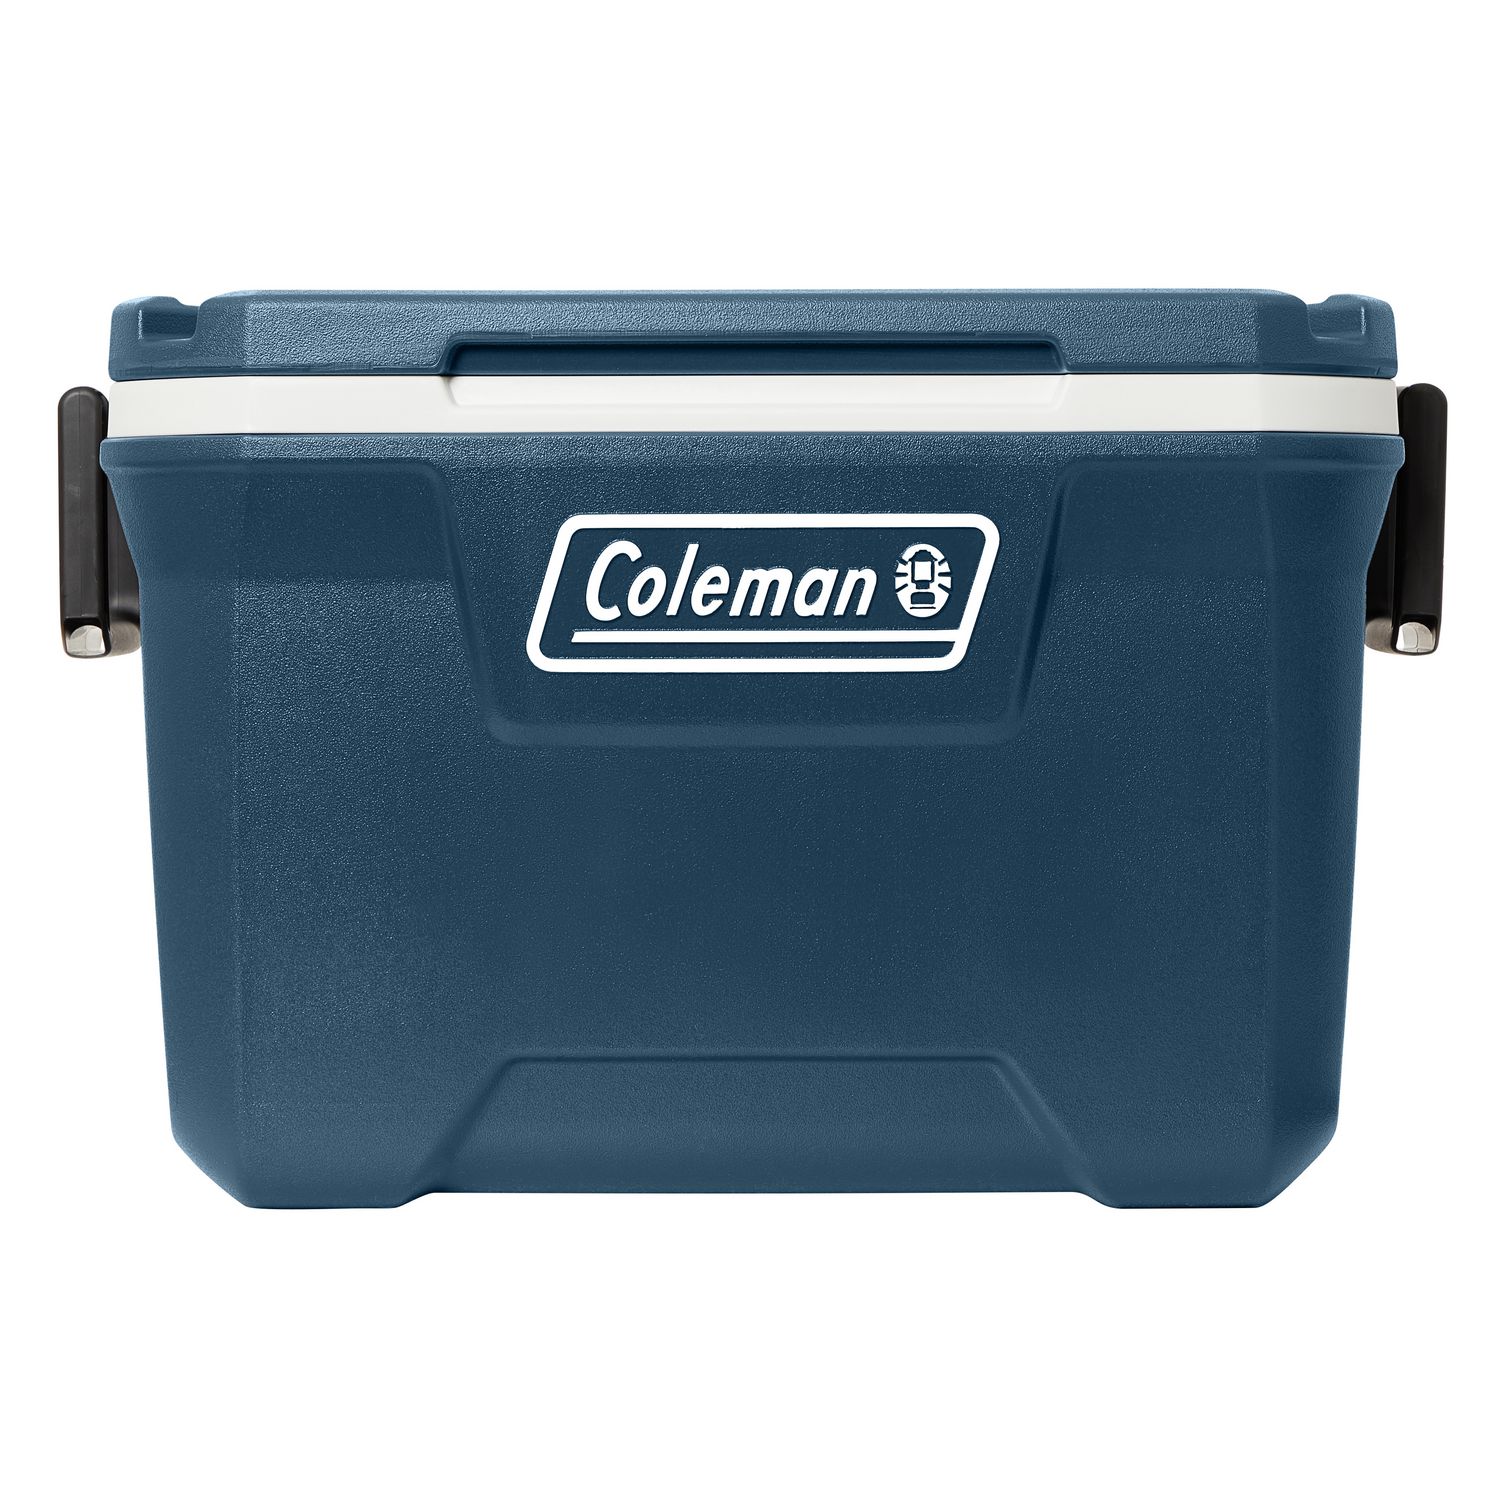 Coleman 52-Quart Extreme Cooler Blue Plastic Camping Picnic Outdoor Ice 